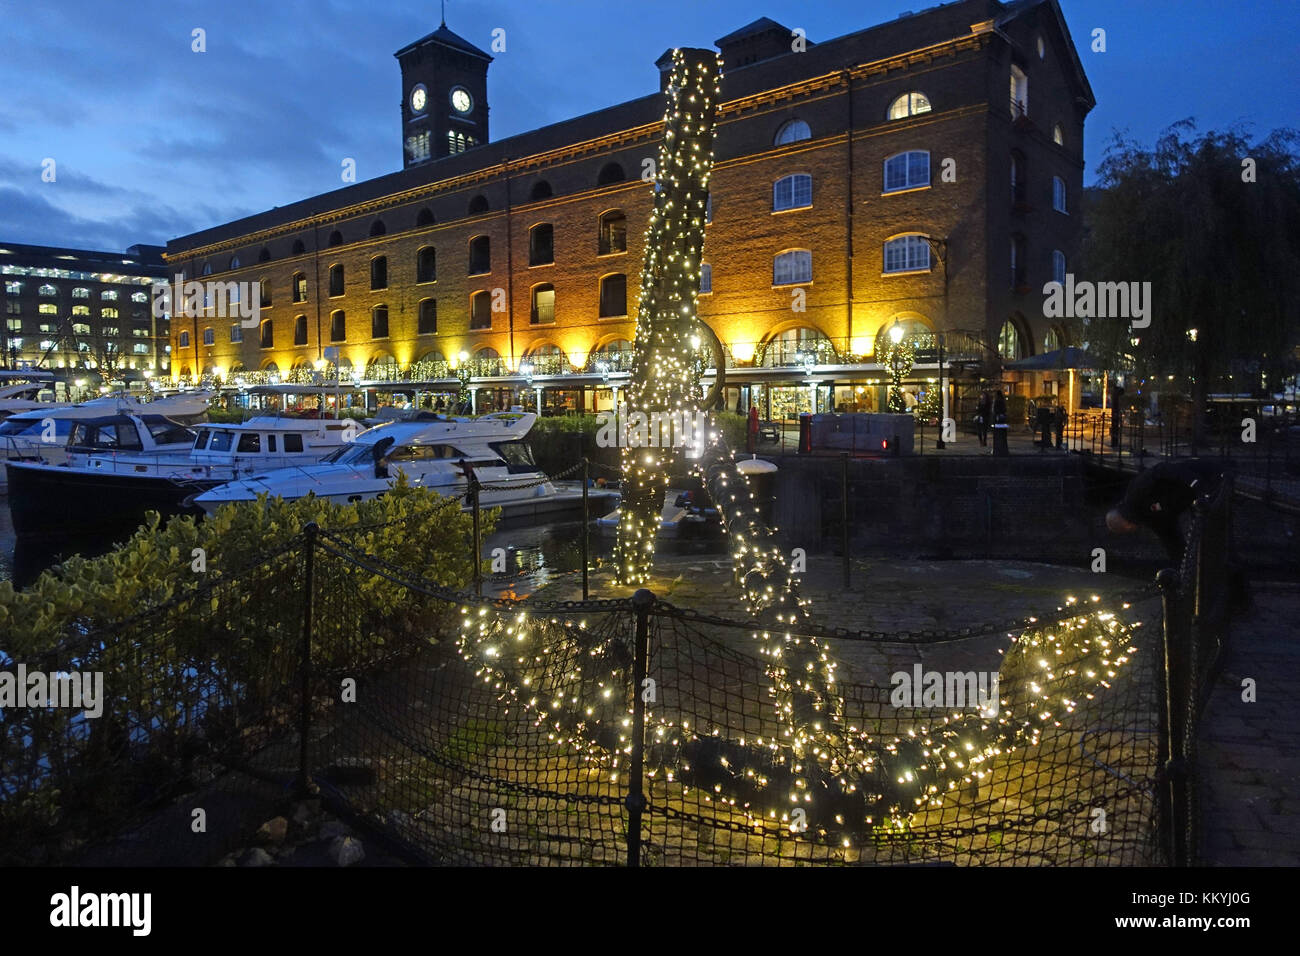 View of an anchor decorated with Christmas lights at night in St Katharine Docks in Central London UK Stock Photo